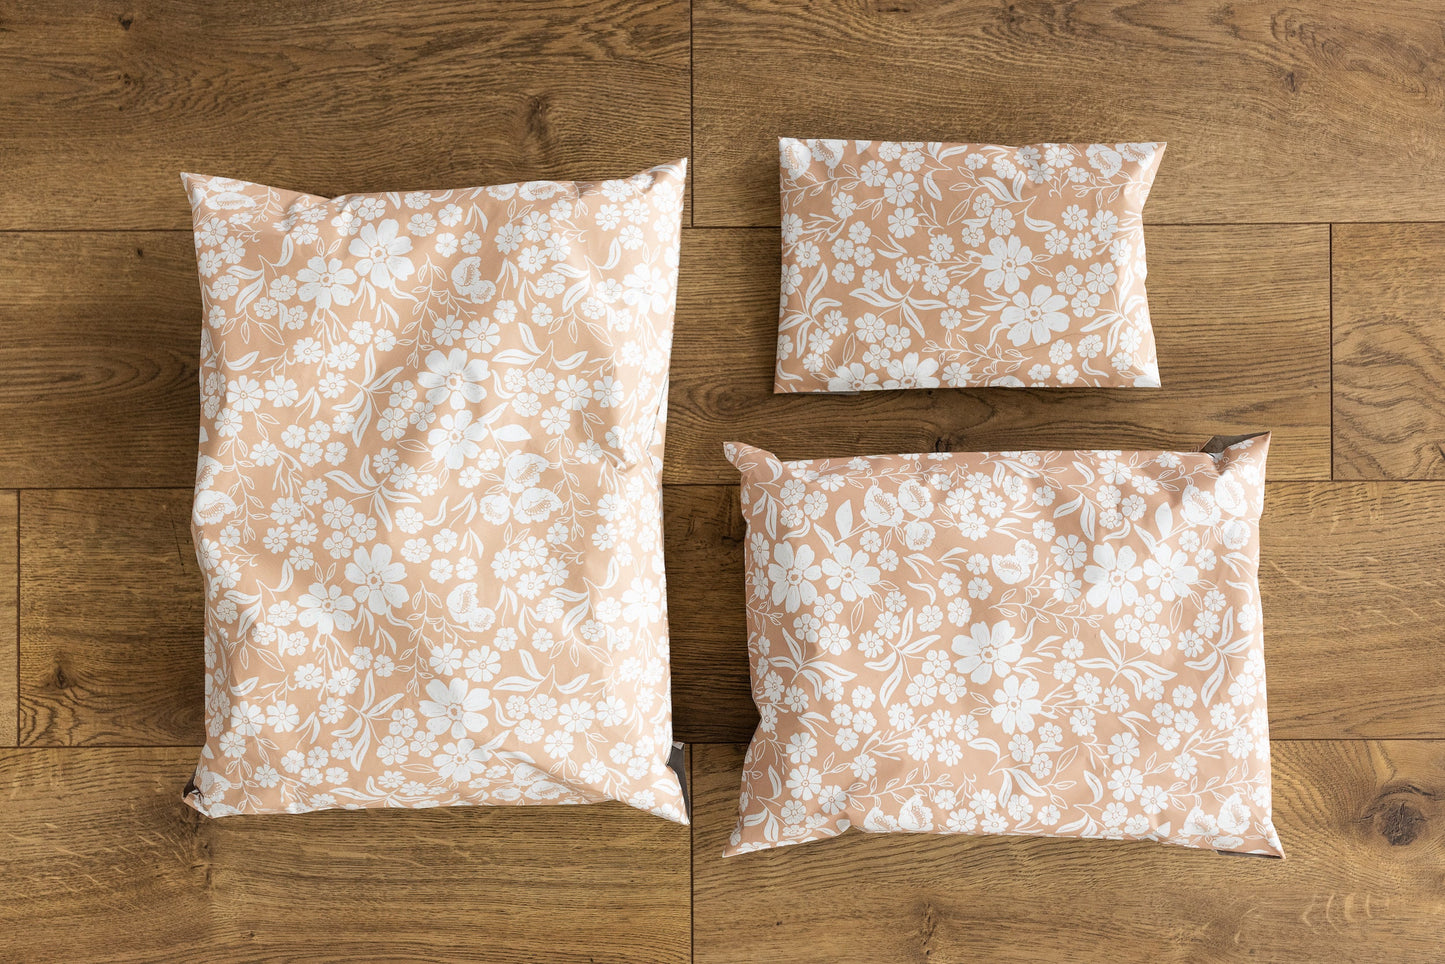 A photo comparing different sized shipping bags. Peachy pink color with white block printed flowers. Pictured are sizes 12x15.5 , 10x13 and 6x9 self sealing plastic envelopes